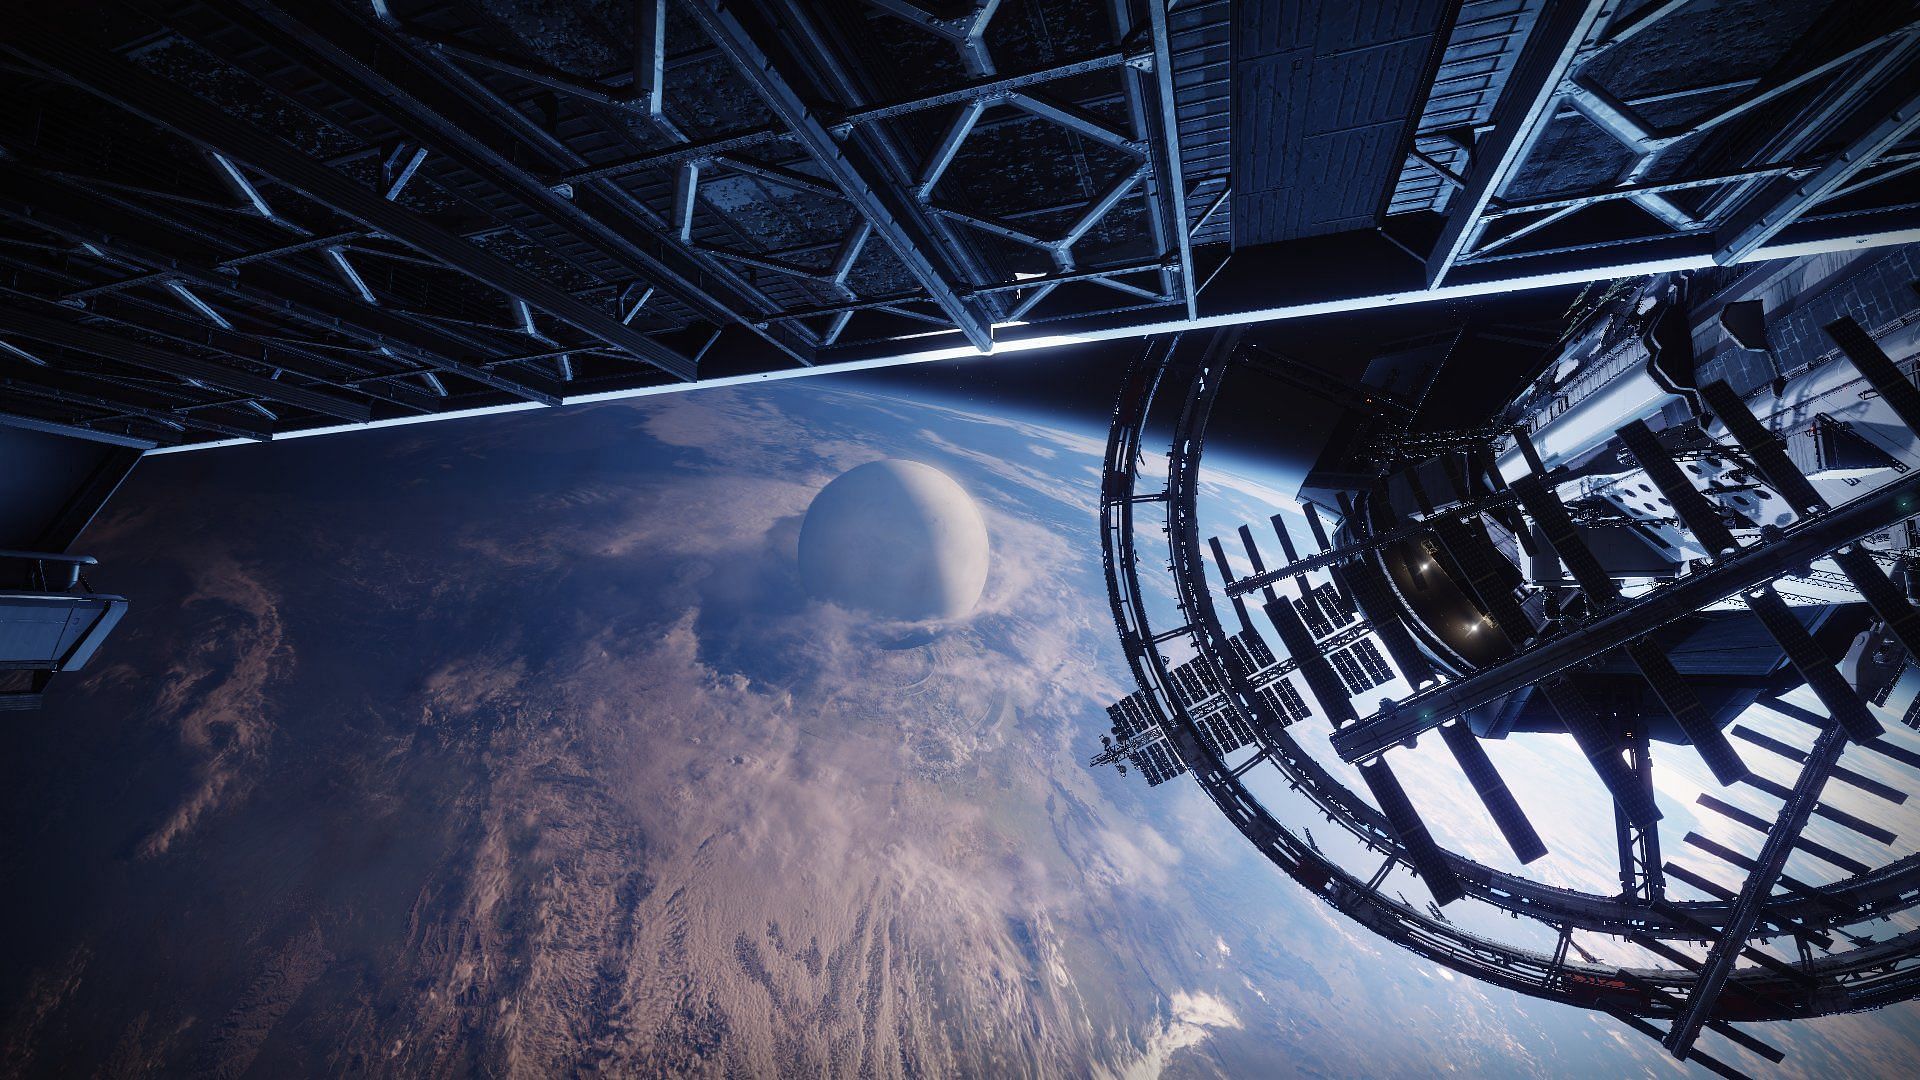 Destiny 2 view from the orbiter station (Image via Bungie) 